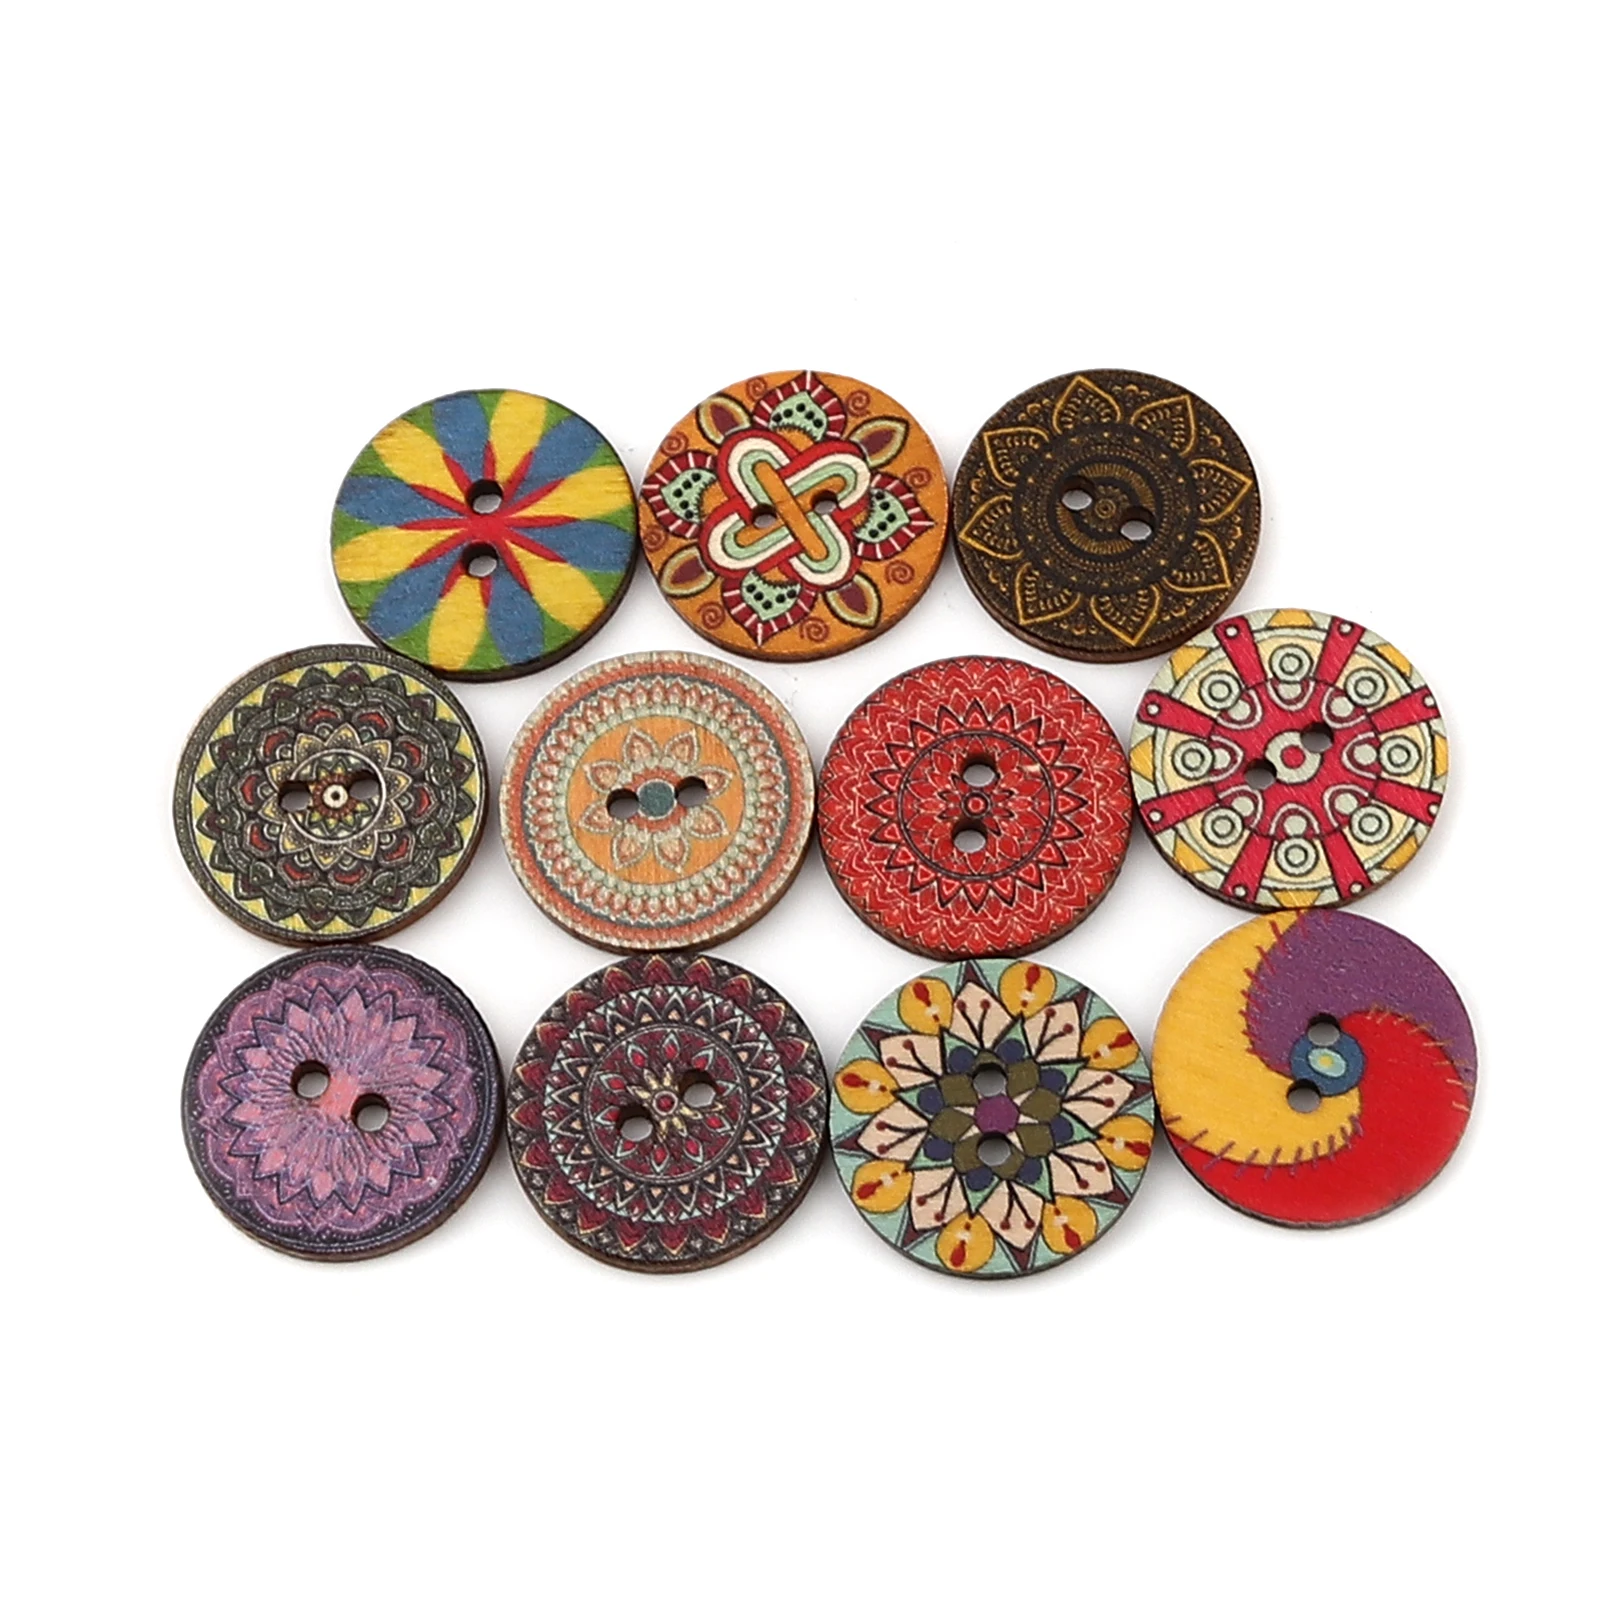 100 PCs 20mm 25mm Dia. Wood Buddhism Mandala Sewing Buttons Scrapbooking Two Holes Round Multicolor Flower  For DIY Craft Making images - 6